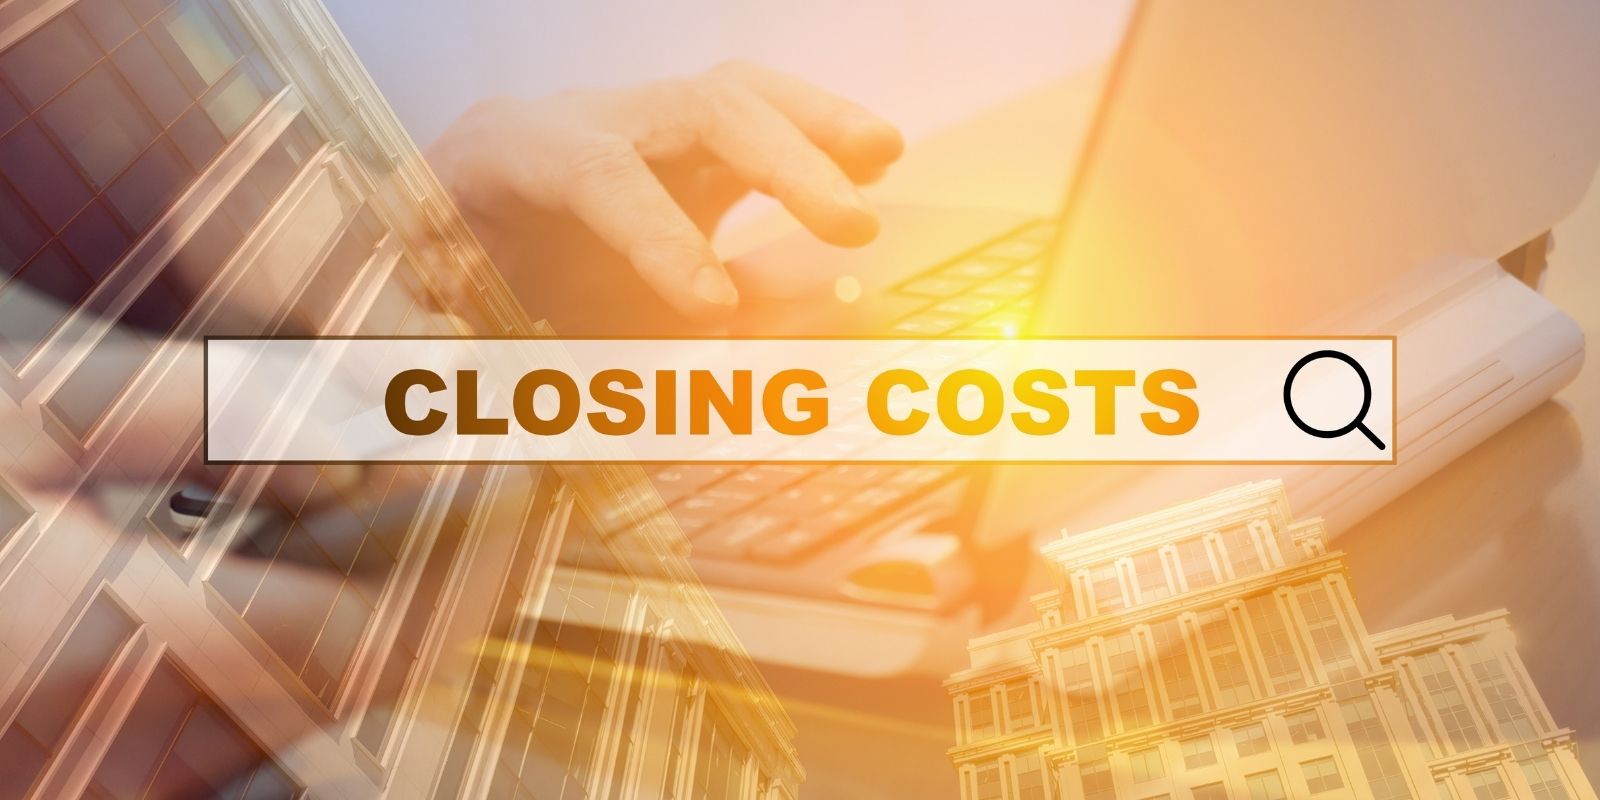 Final Thoughts on Closing Costs